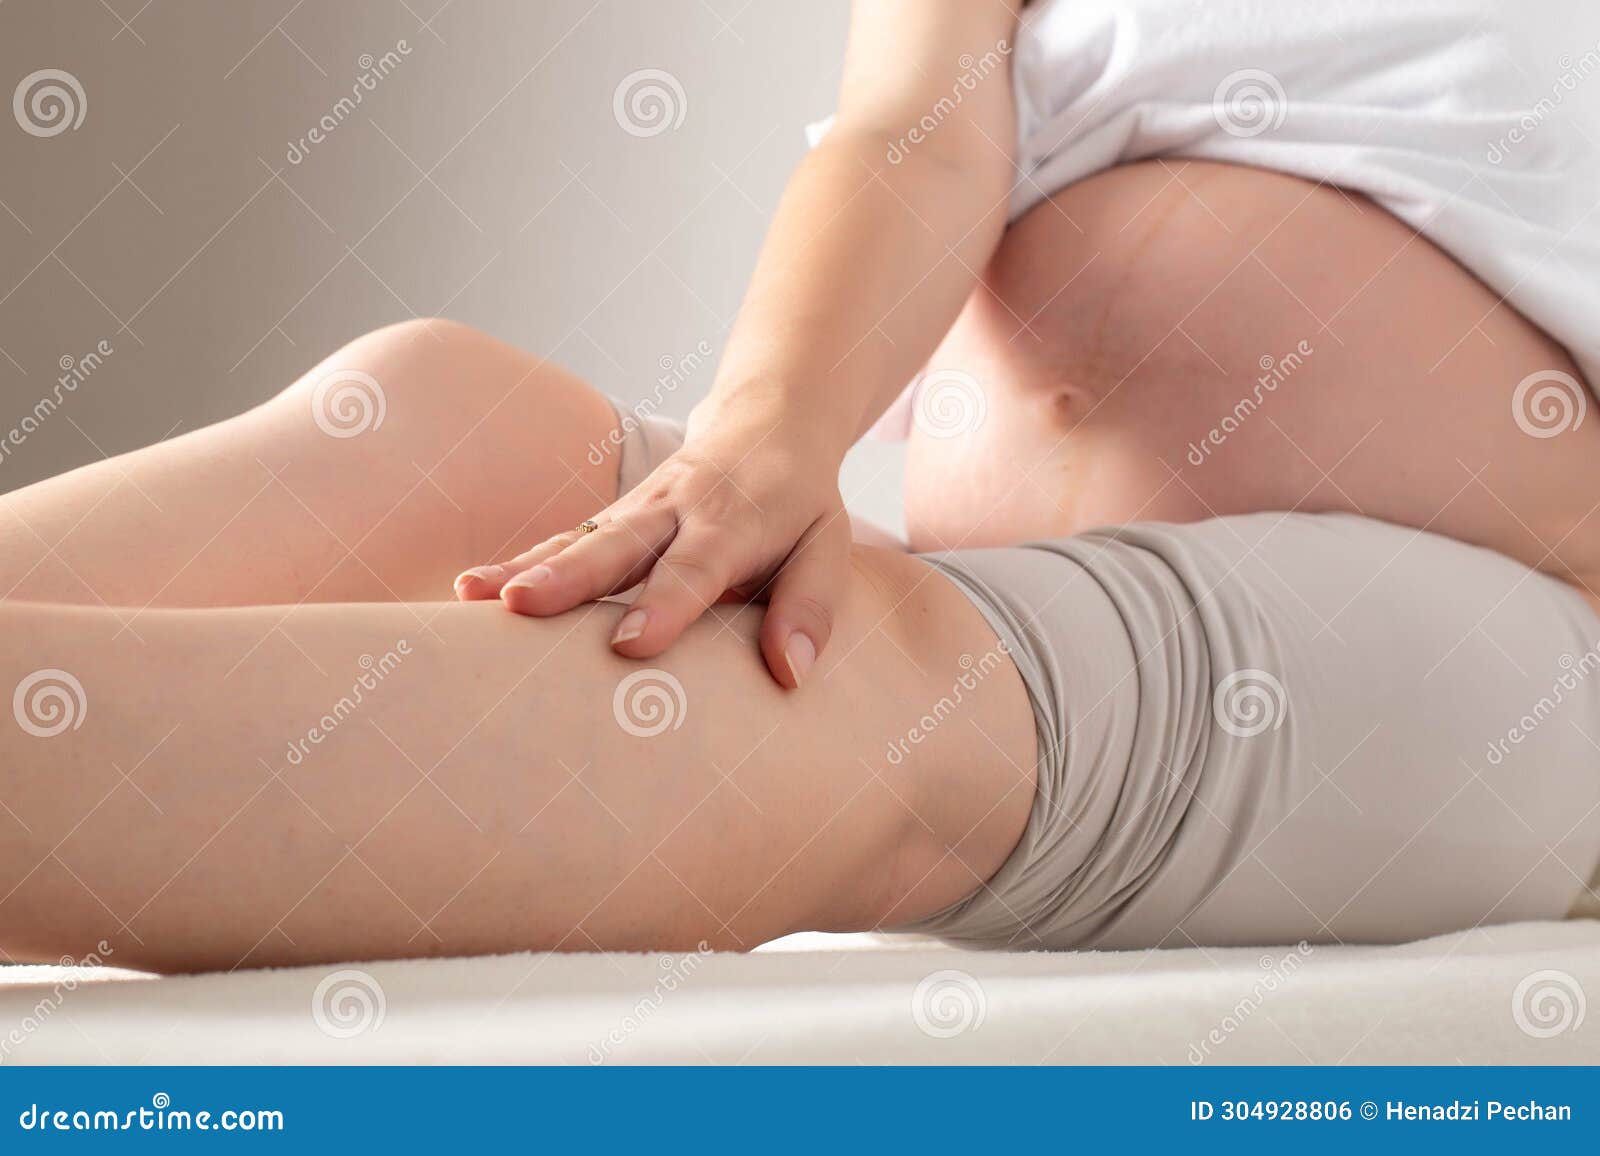 pregnant girl sits and holds her leg on a white background. concept of heaviness in the legs during pregnancy. varicose